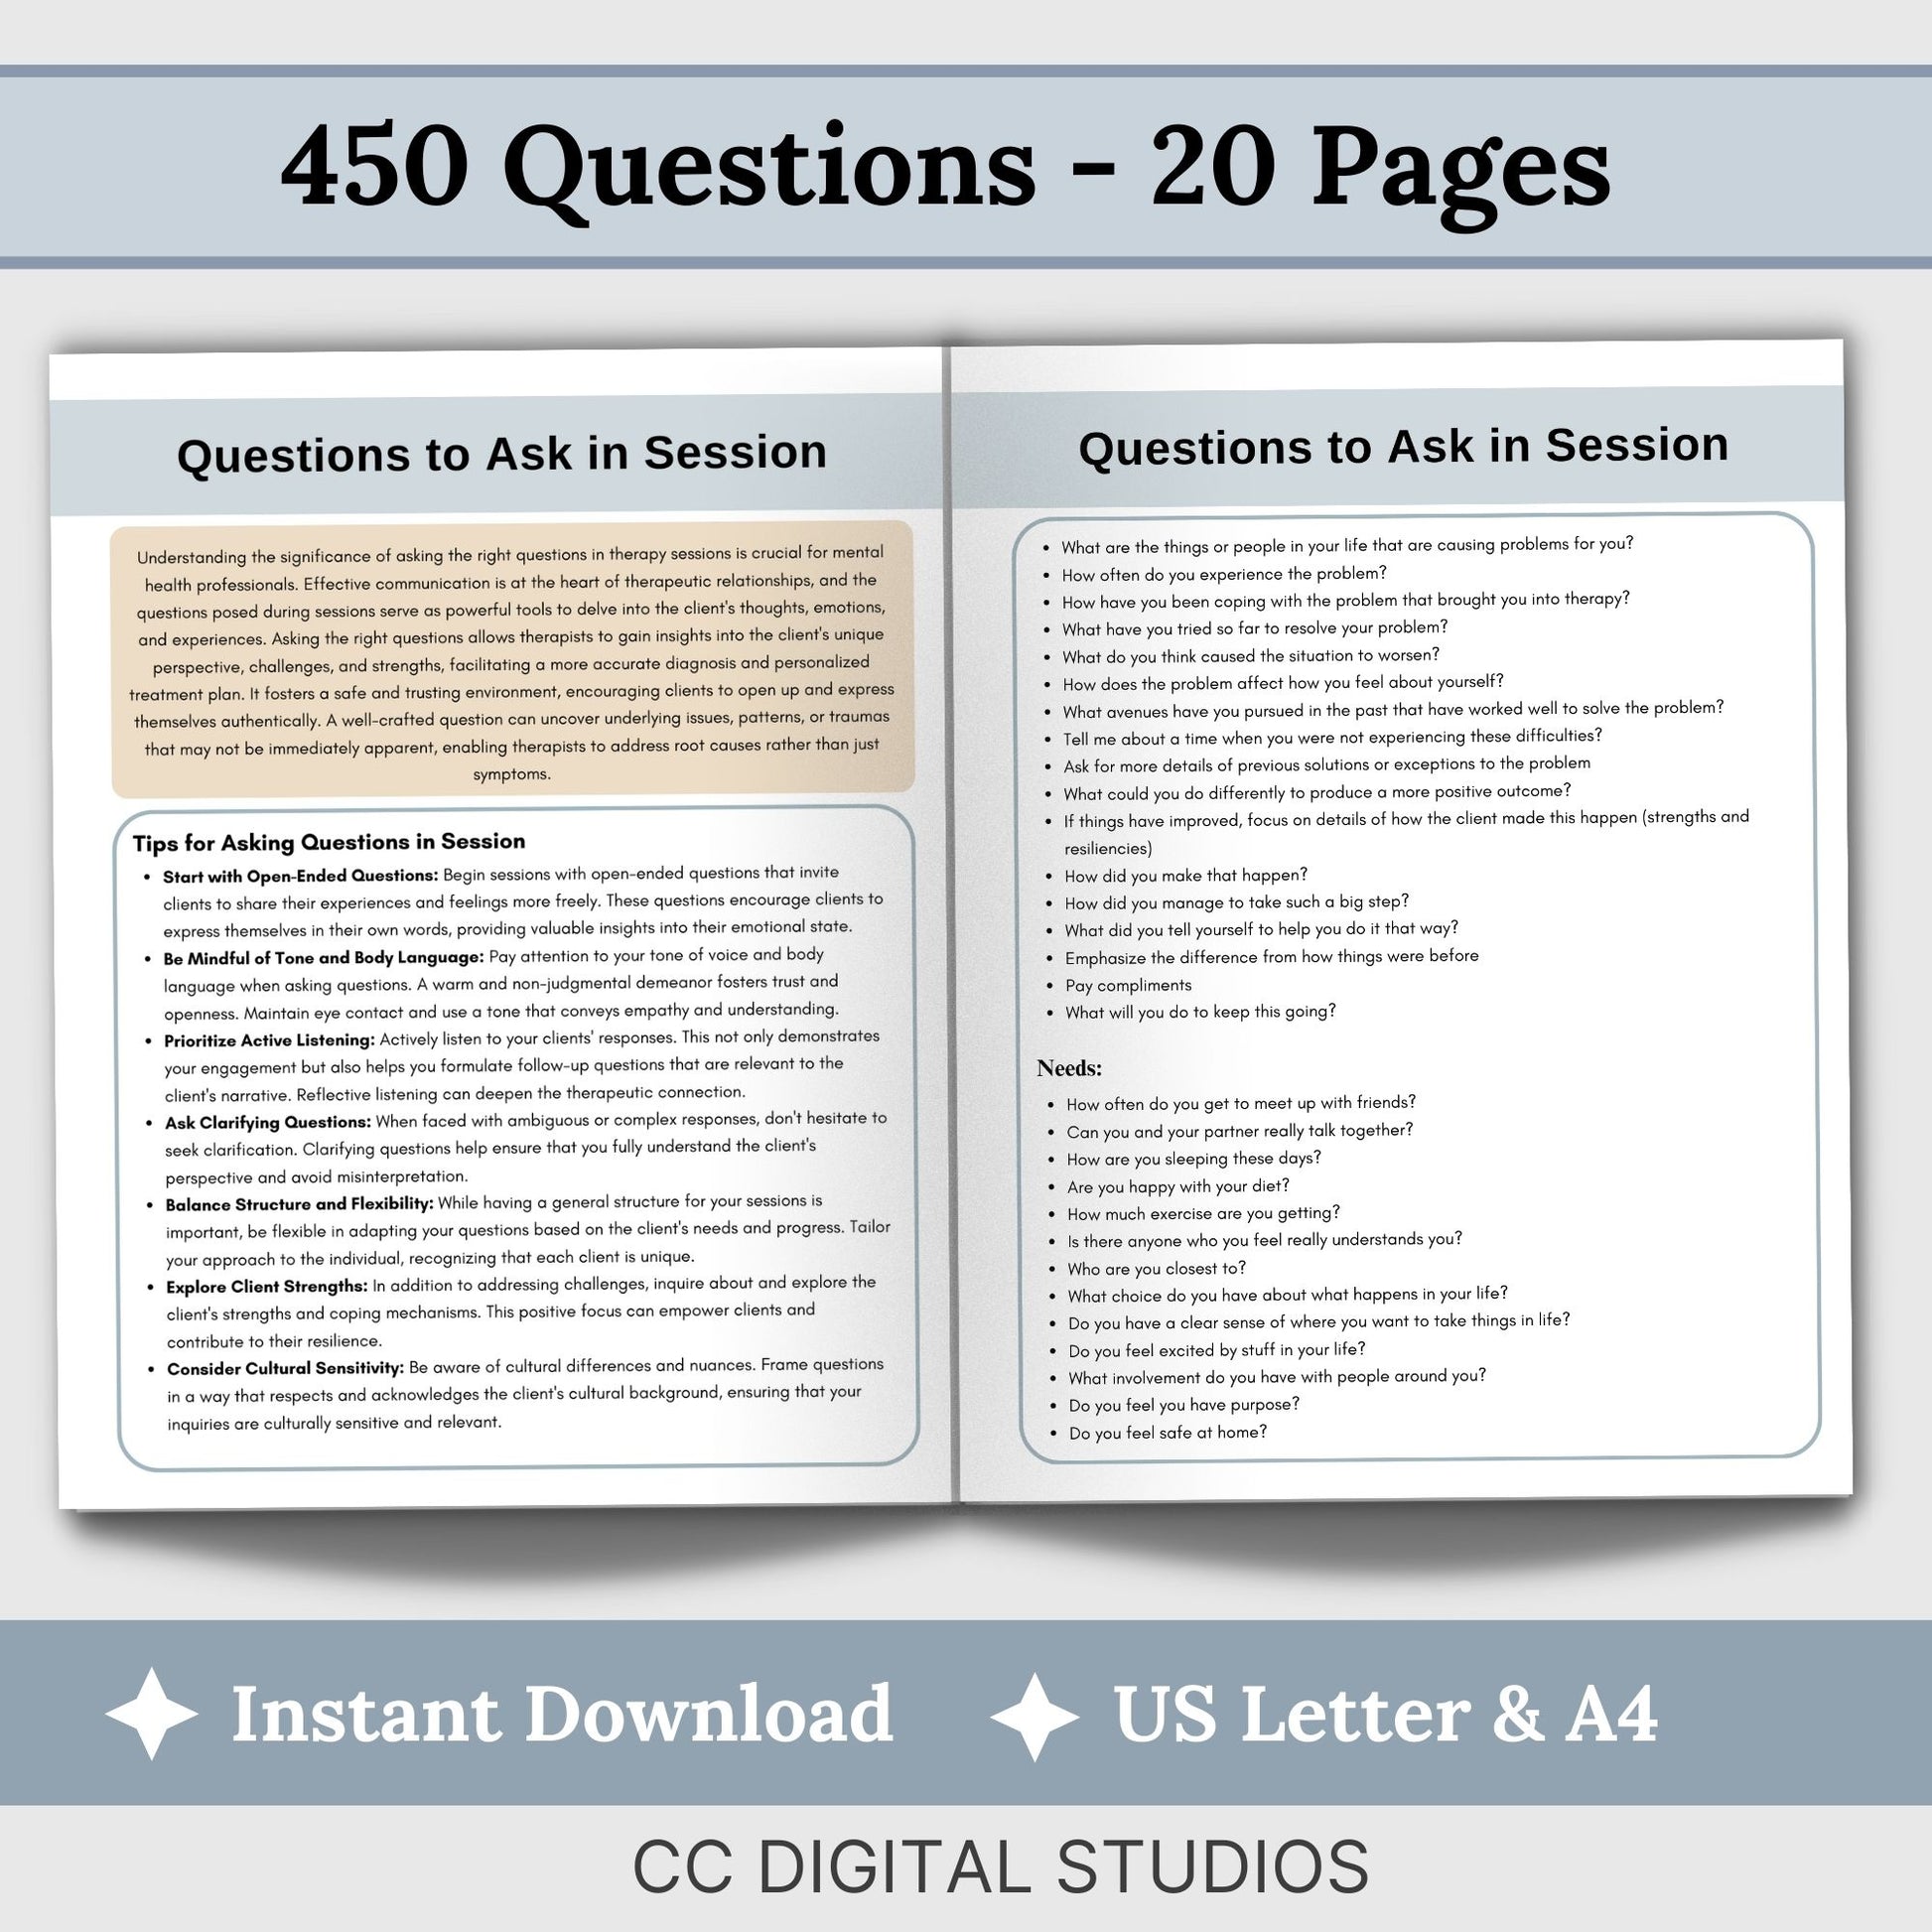 450 Questions and Tips Session Guide for mental health therapists. This therapy cheat sheet is designed to elevate your psychotherapy practice, featuring open-ended questions, crisis questions, and suicide assessment prompts.